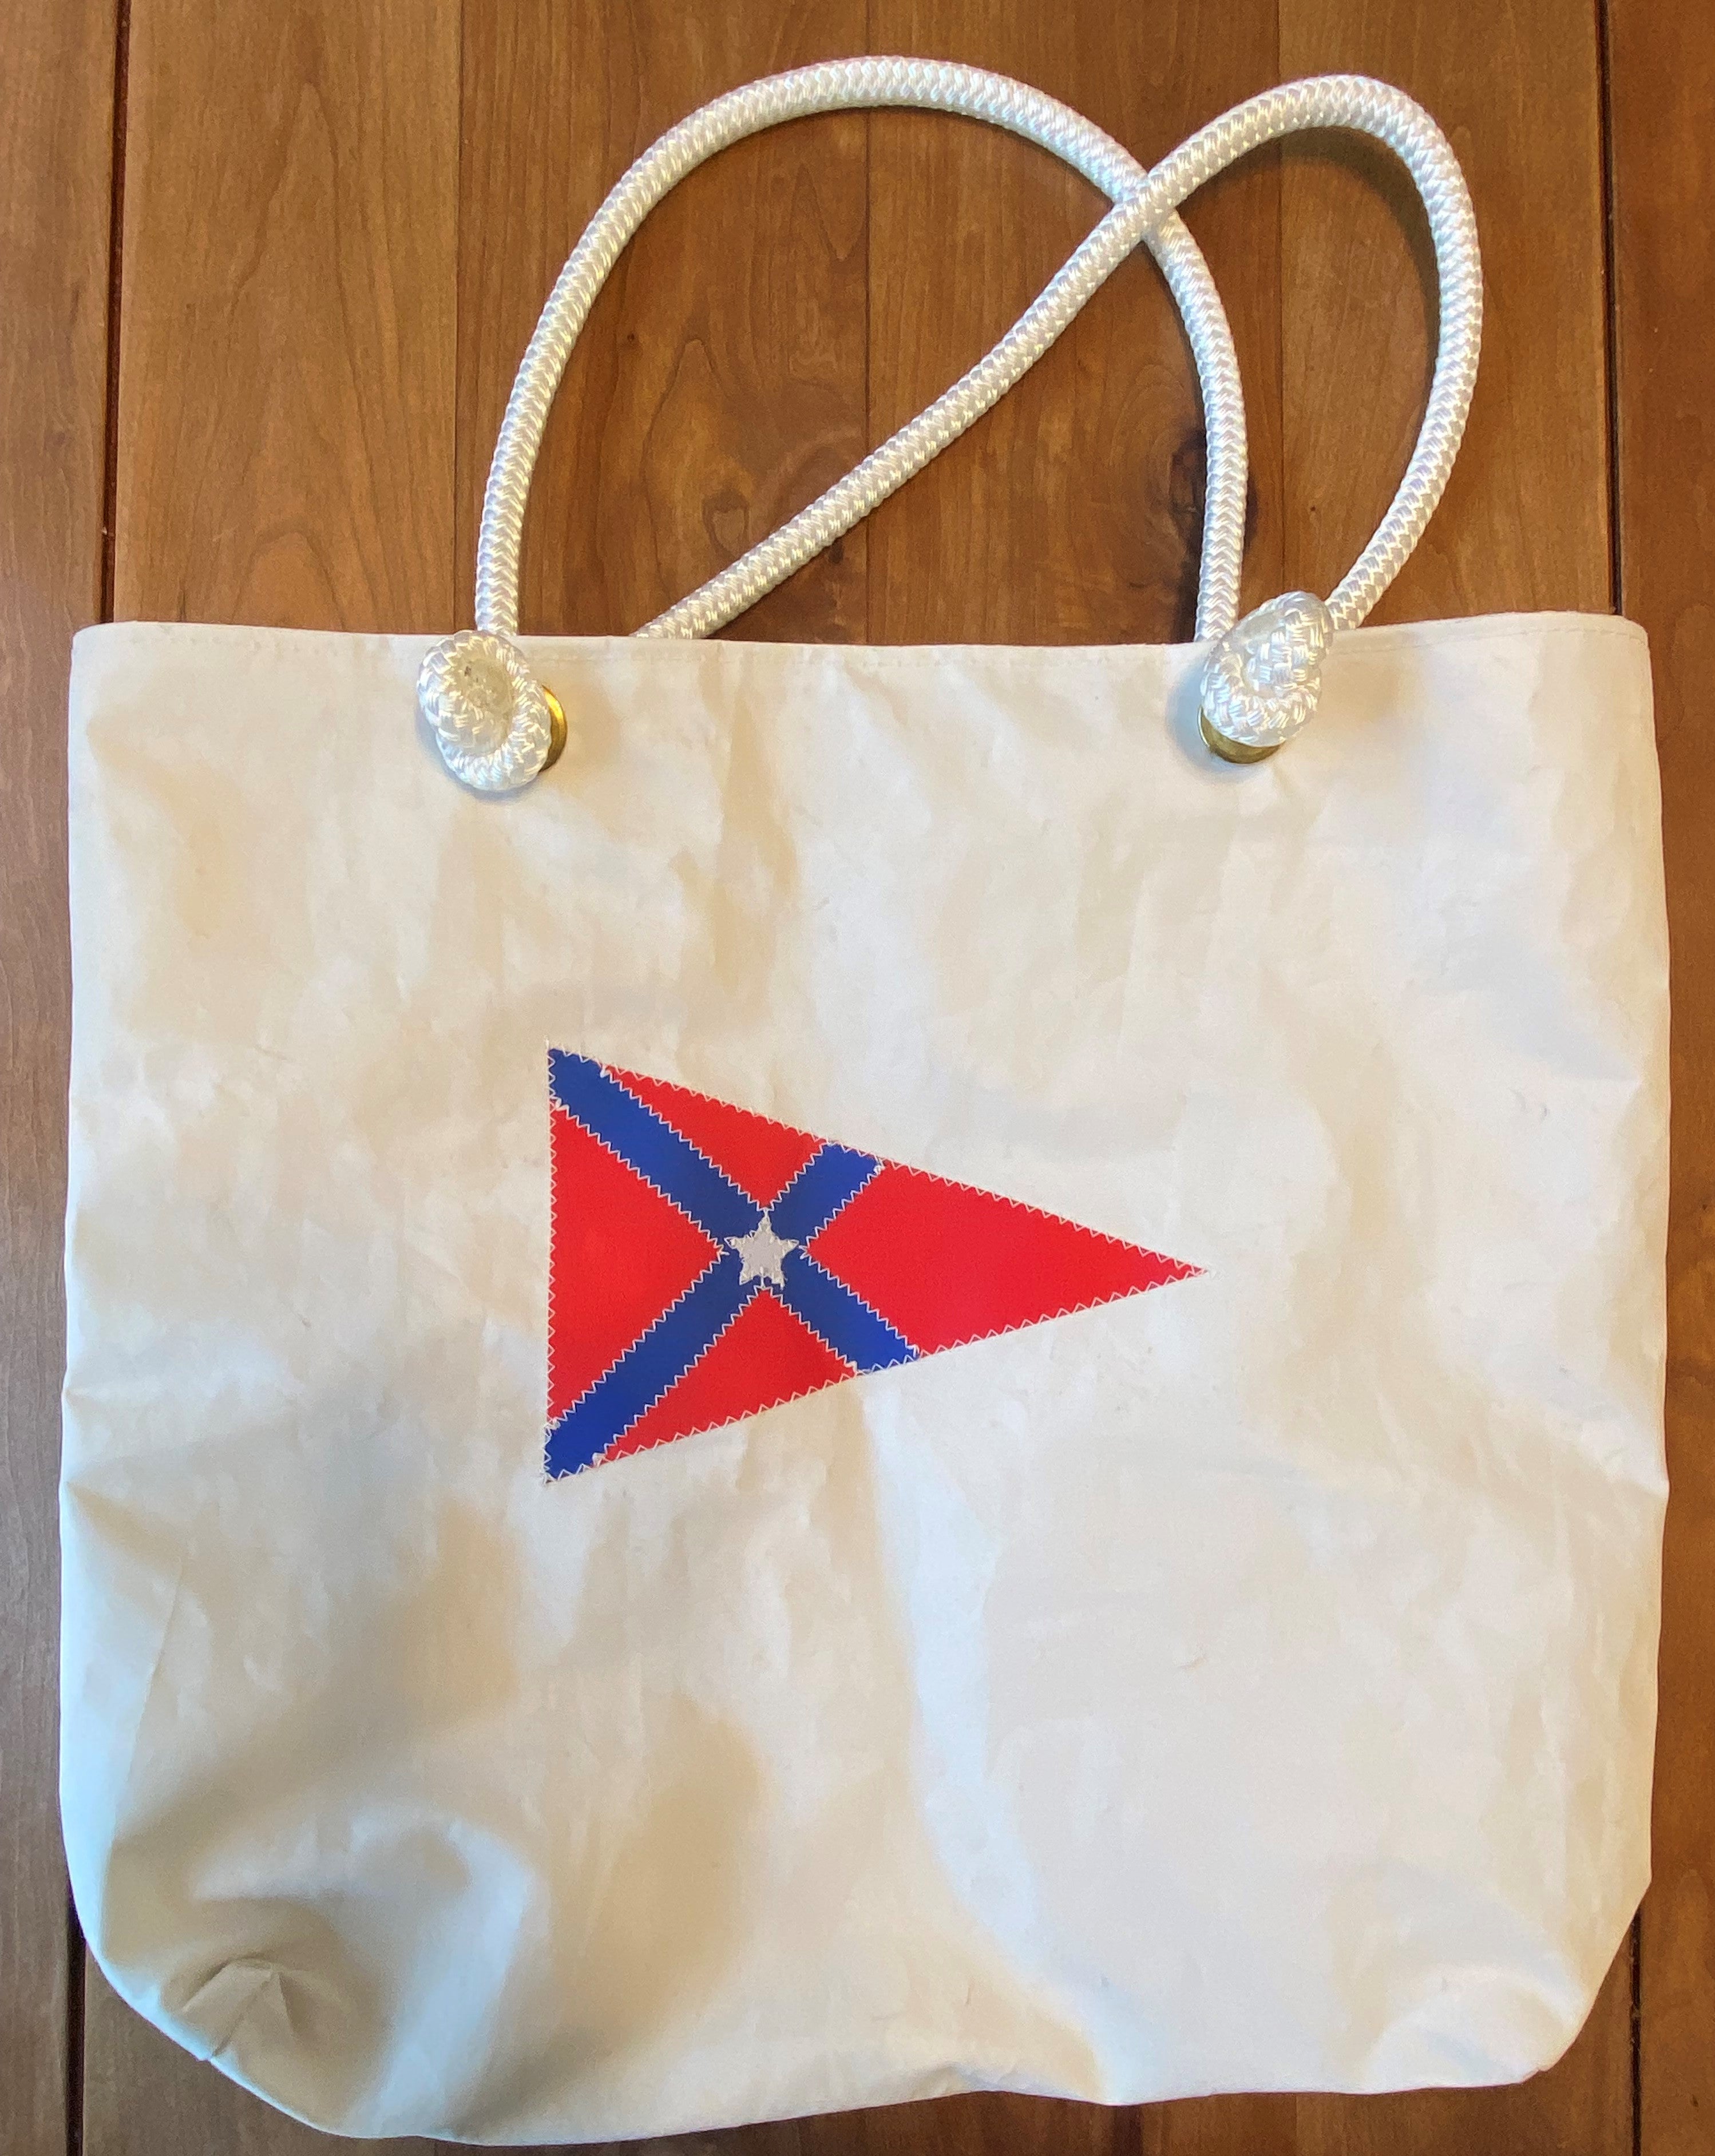 Recycled Sail Bag, Tote Bag Handmade from Sails, Blue & Red – New England  Trading Co